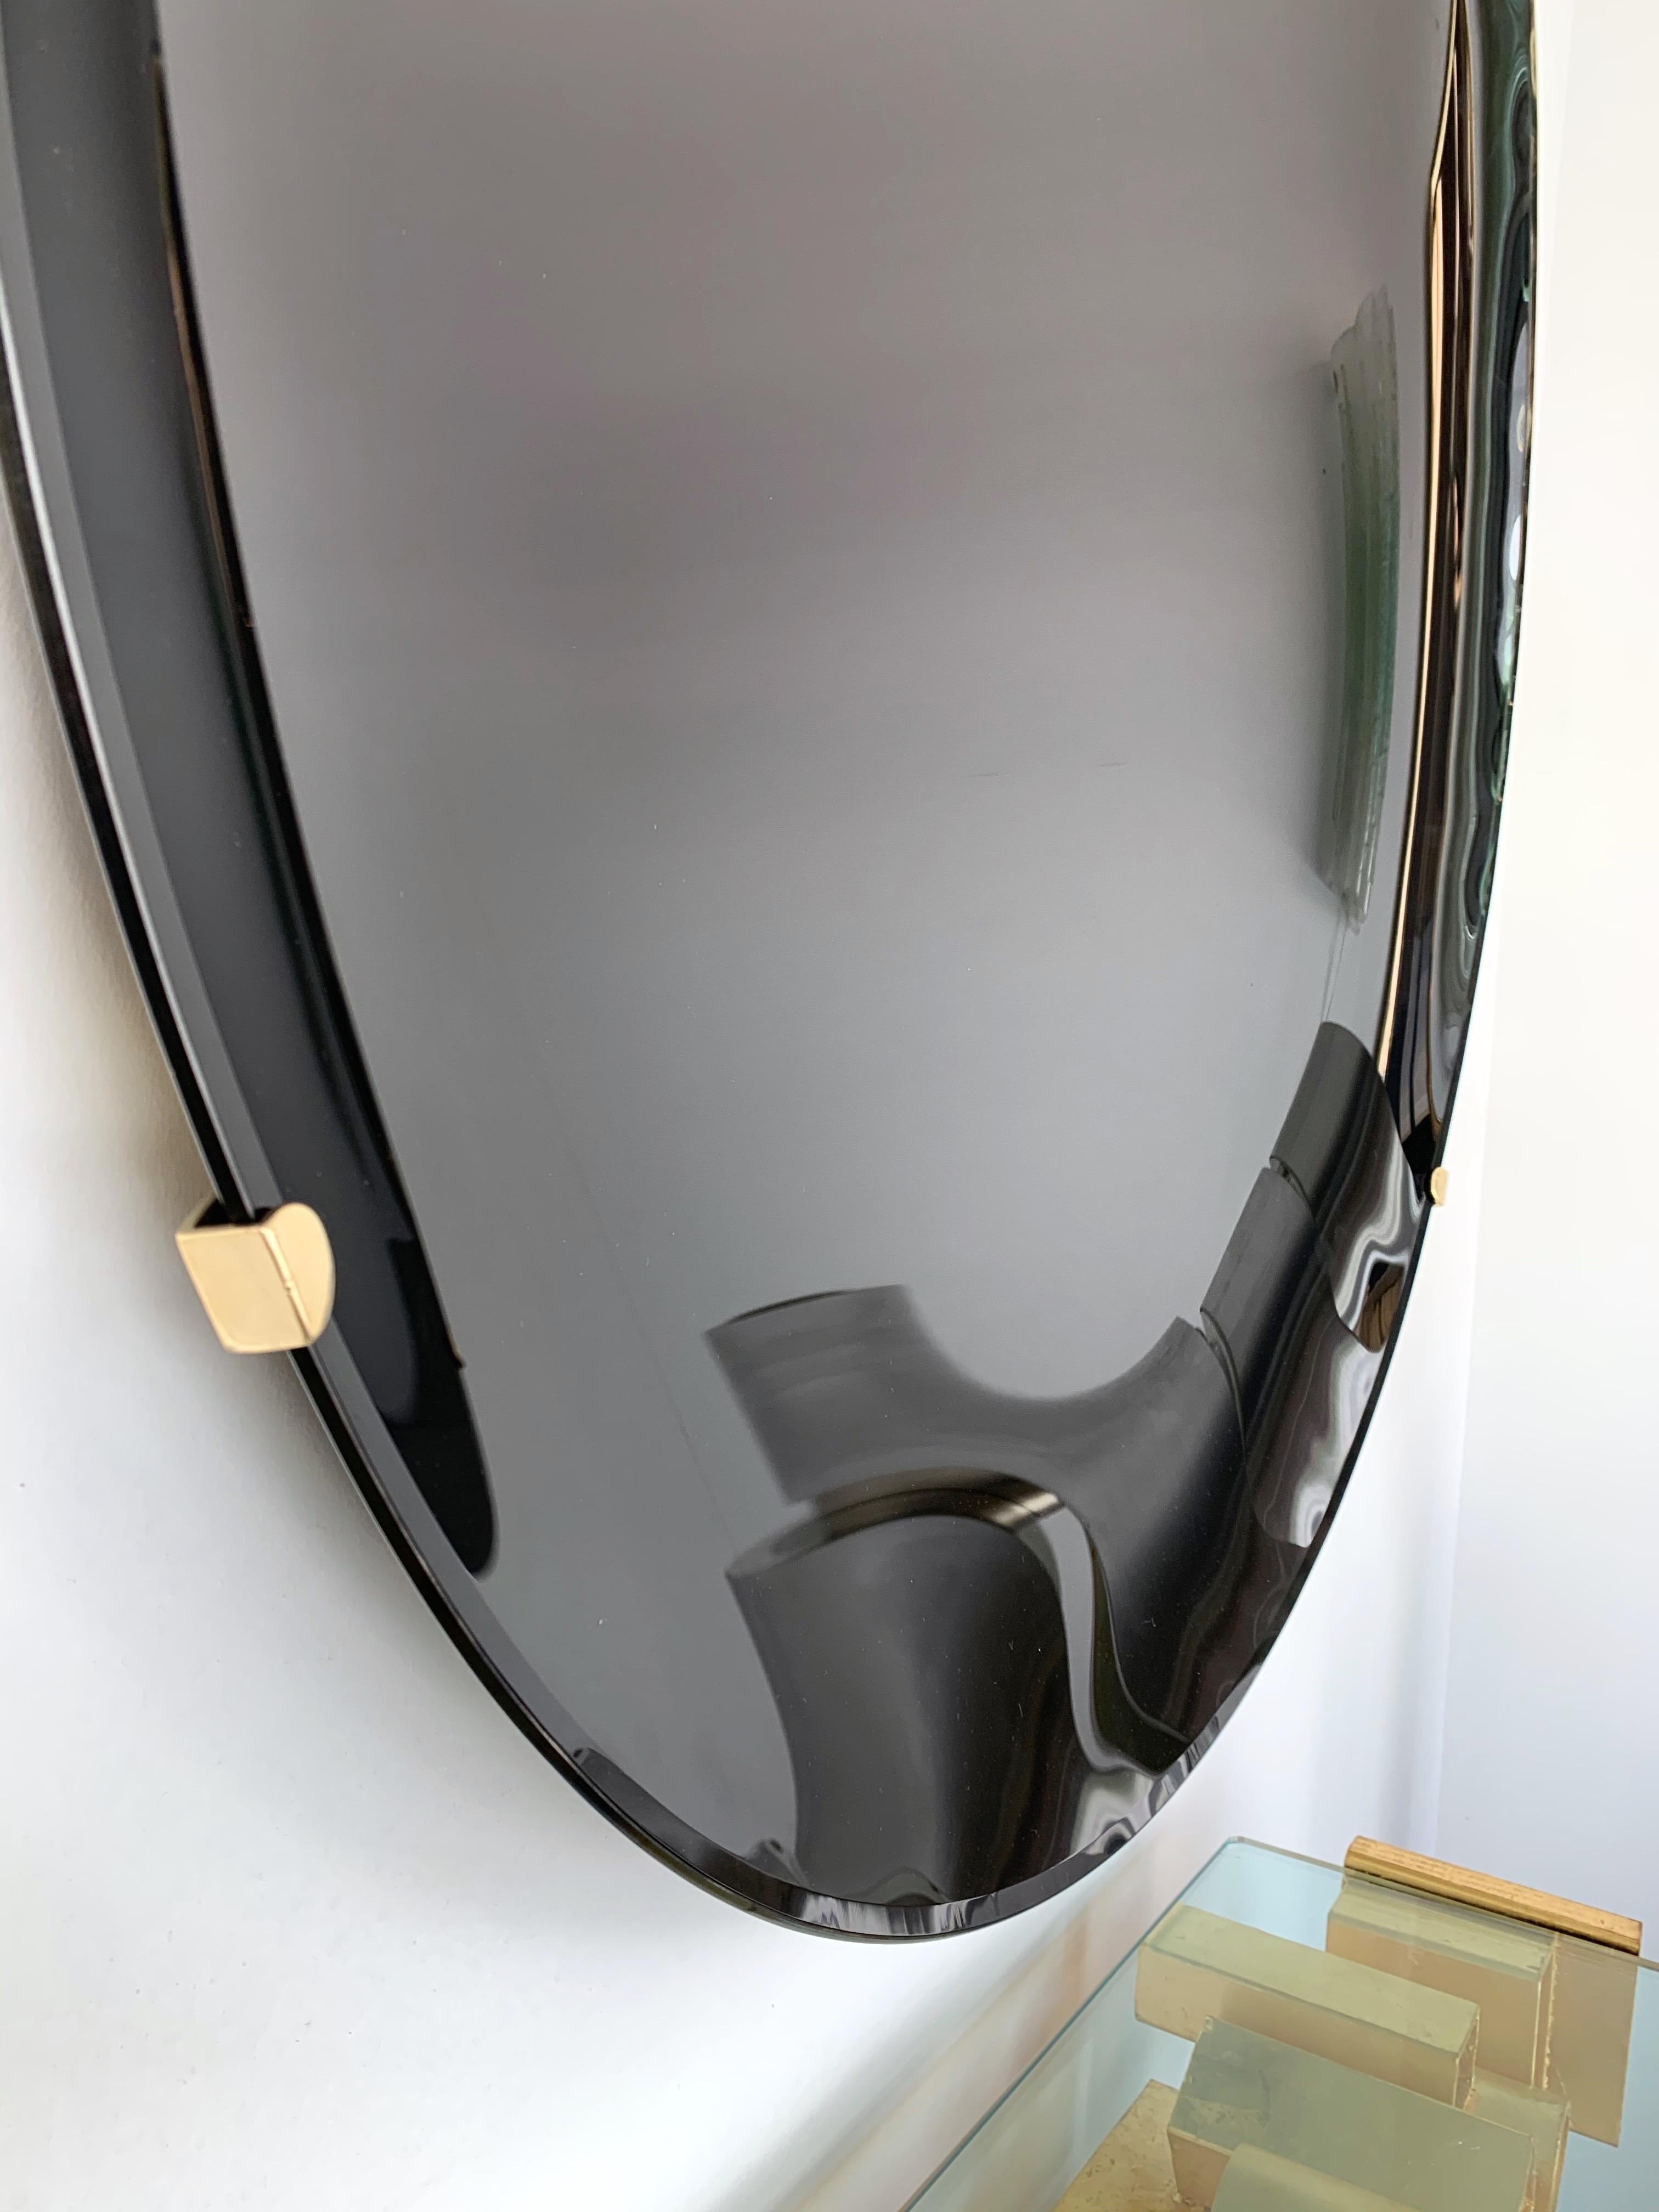 Contemporary curve concave sculpture black wall mirror, brass structure. Artisanal handmade work made by a small italian design workshop using the old style mercurization technic.

standart diameter dimensions indicated in description 43.31